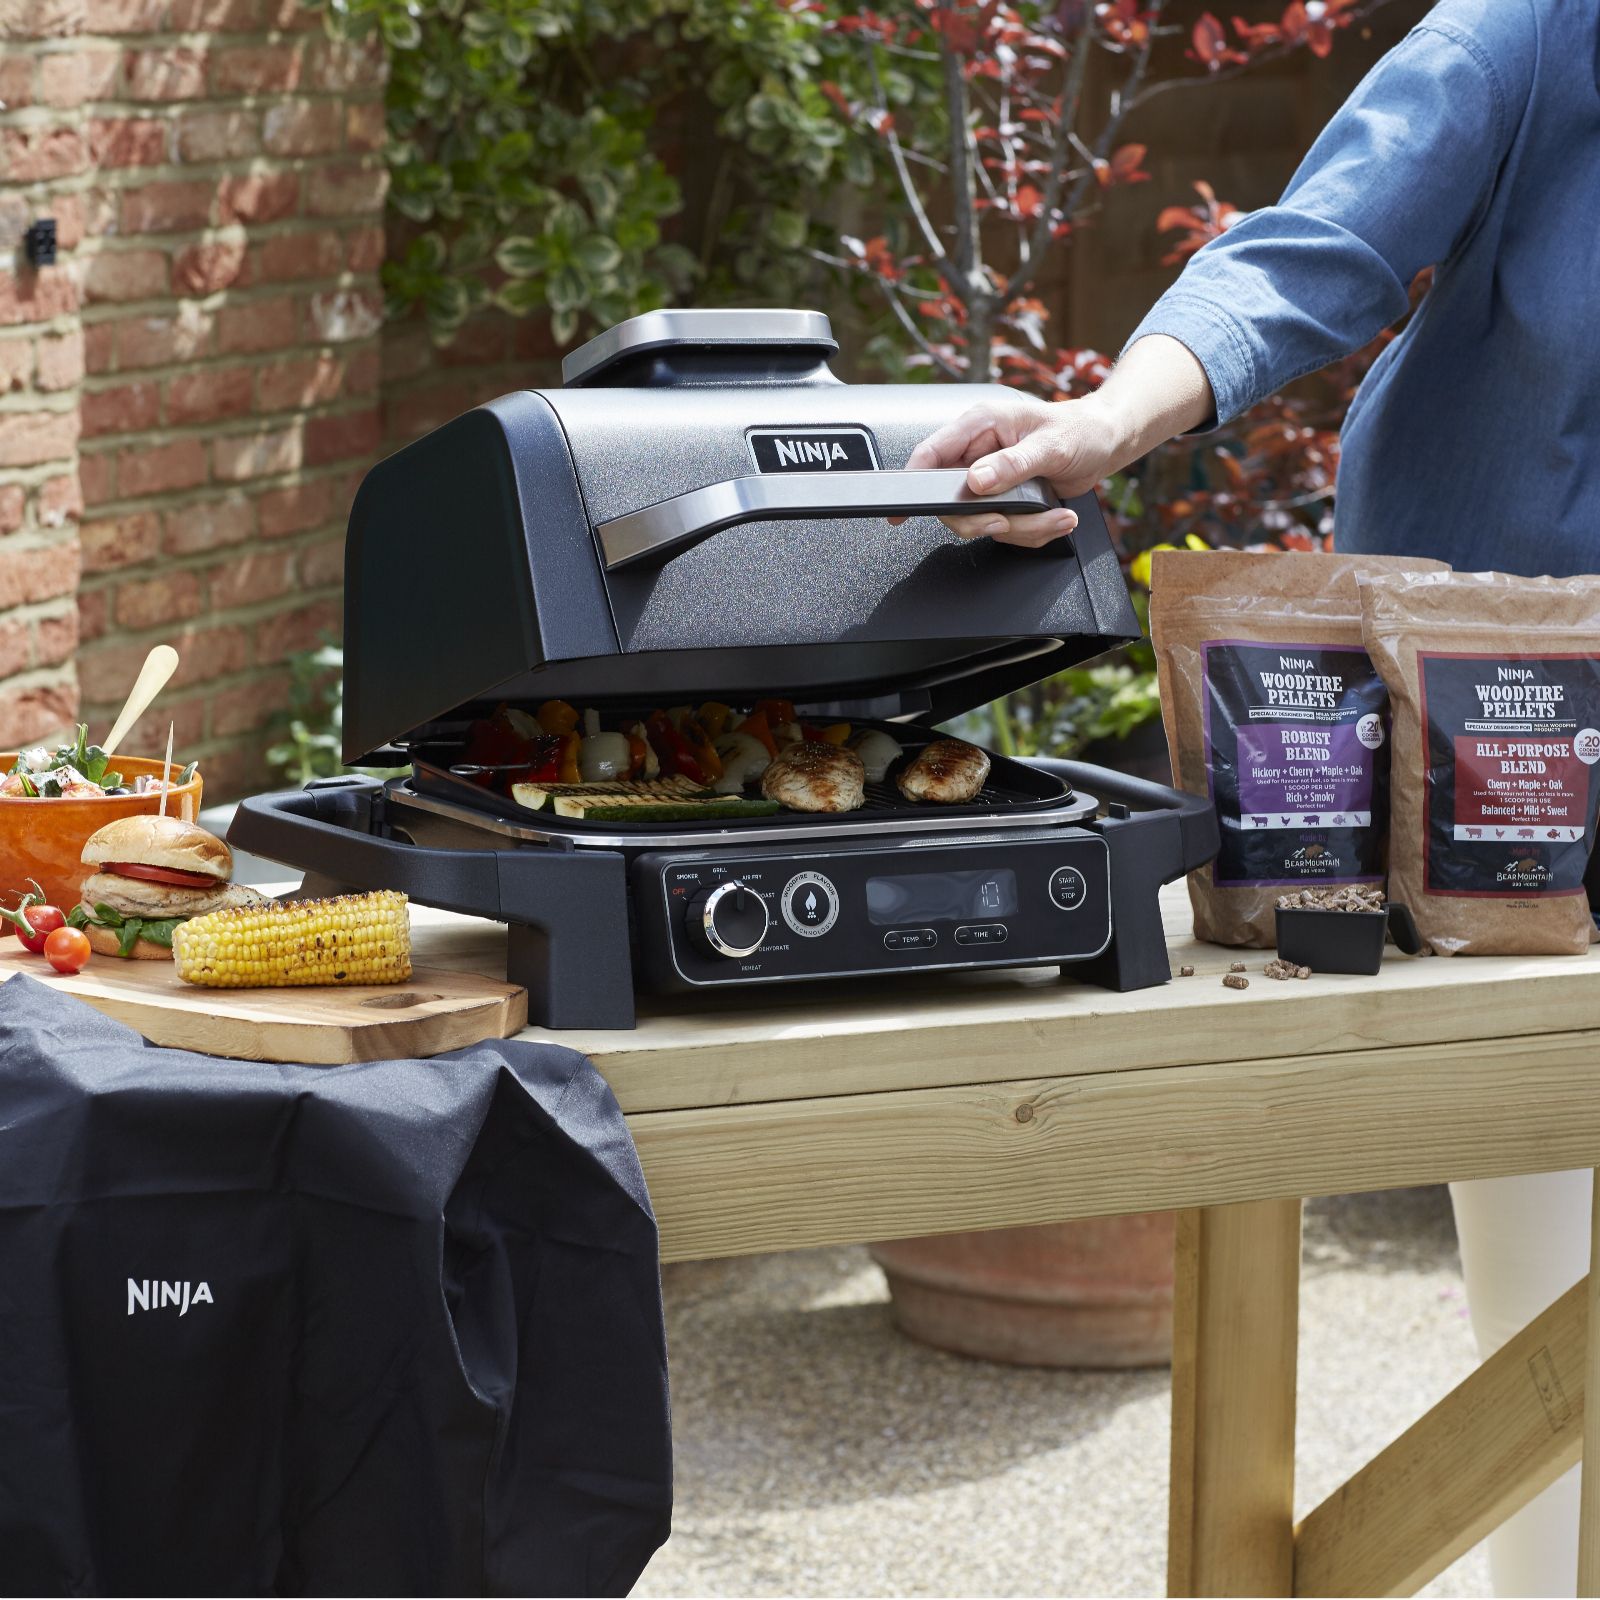 WOODFIRE: Discover the Ninja Woodfire Electric Pellet Smoker, a versatile  outdoor BBQ, grilling, baking, dehydrating, smoking, air frying, and